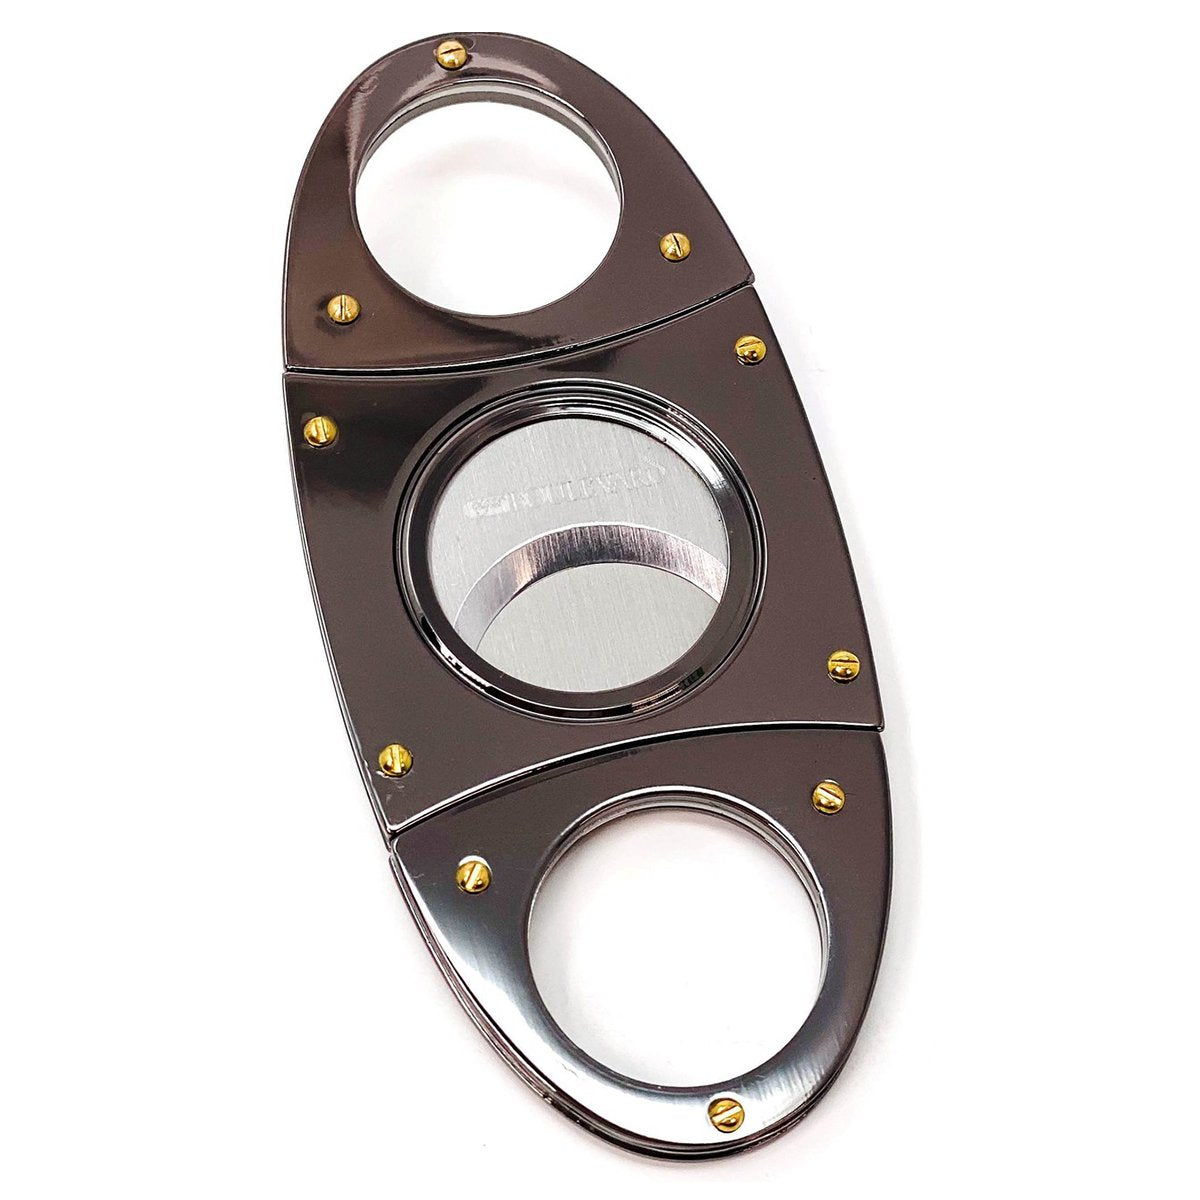 Cigar Cutter SHINY GUN METAL Oval Shape Double Stainless Steel Blades O Round Handles